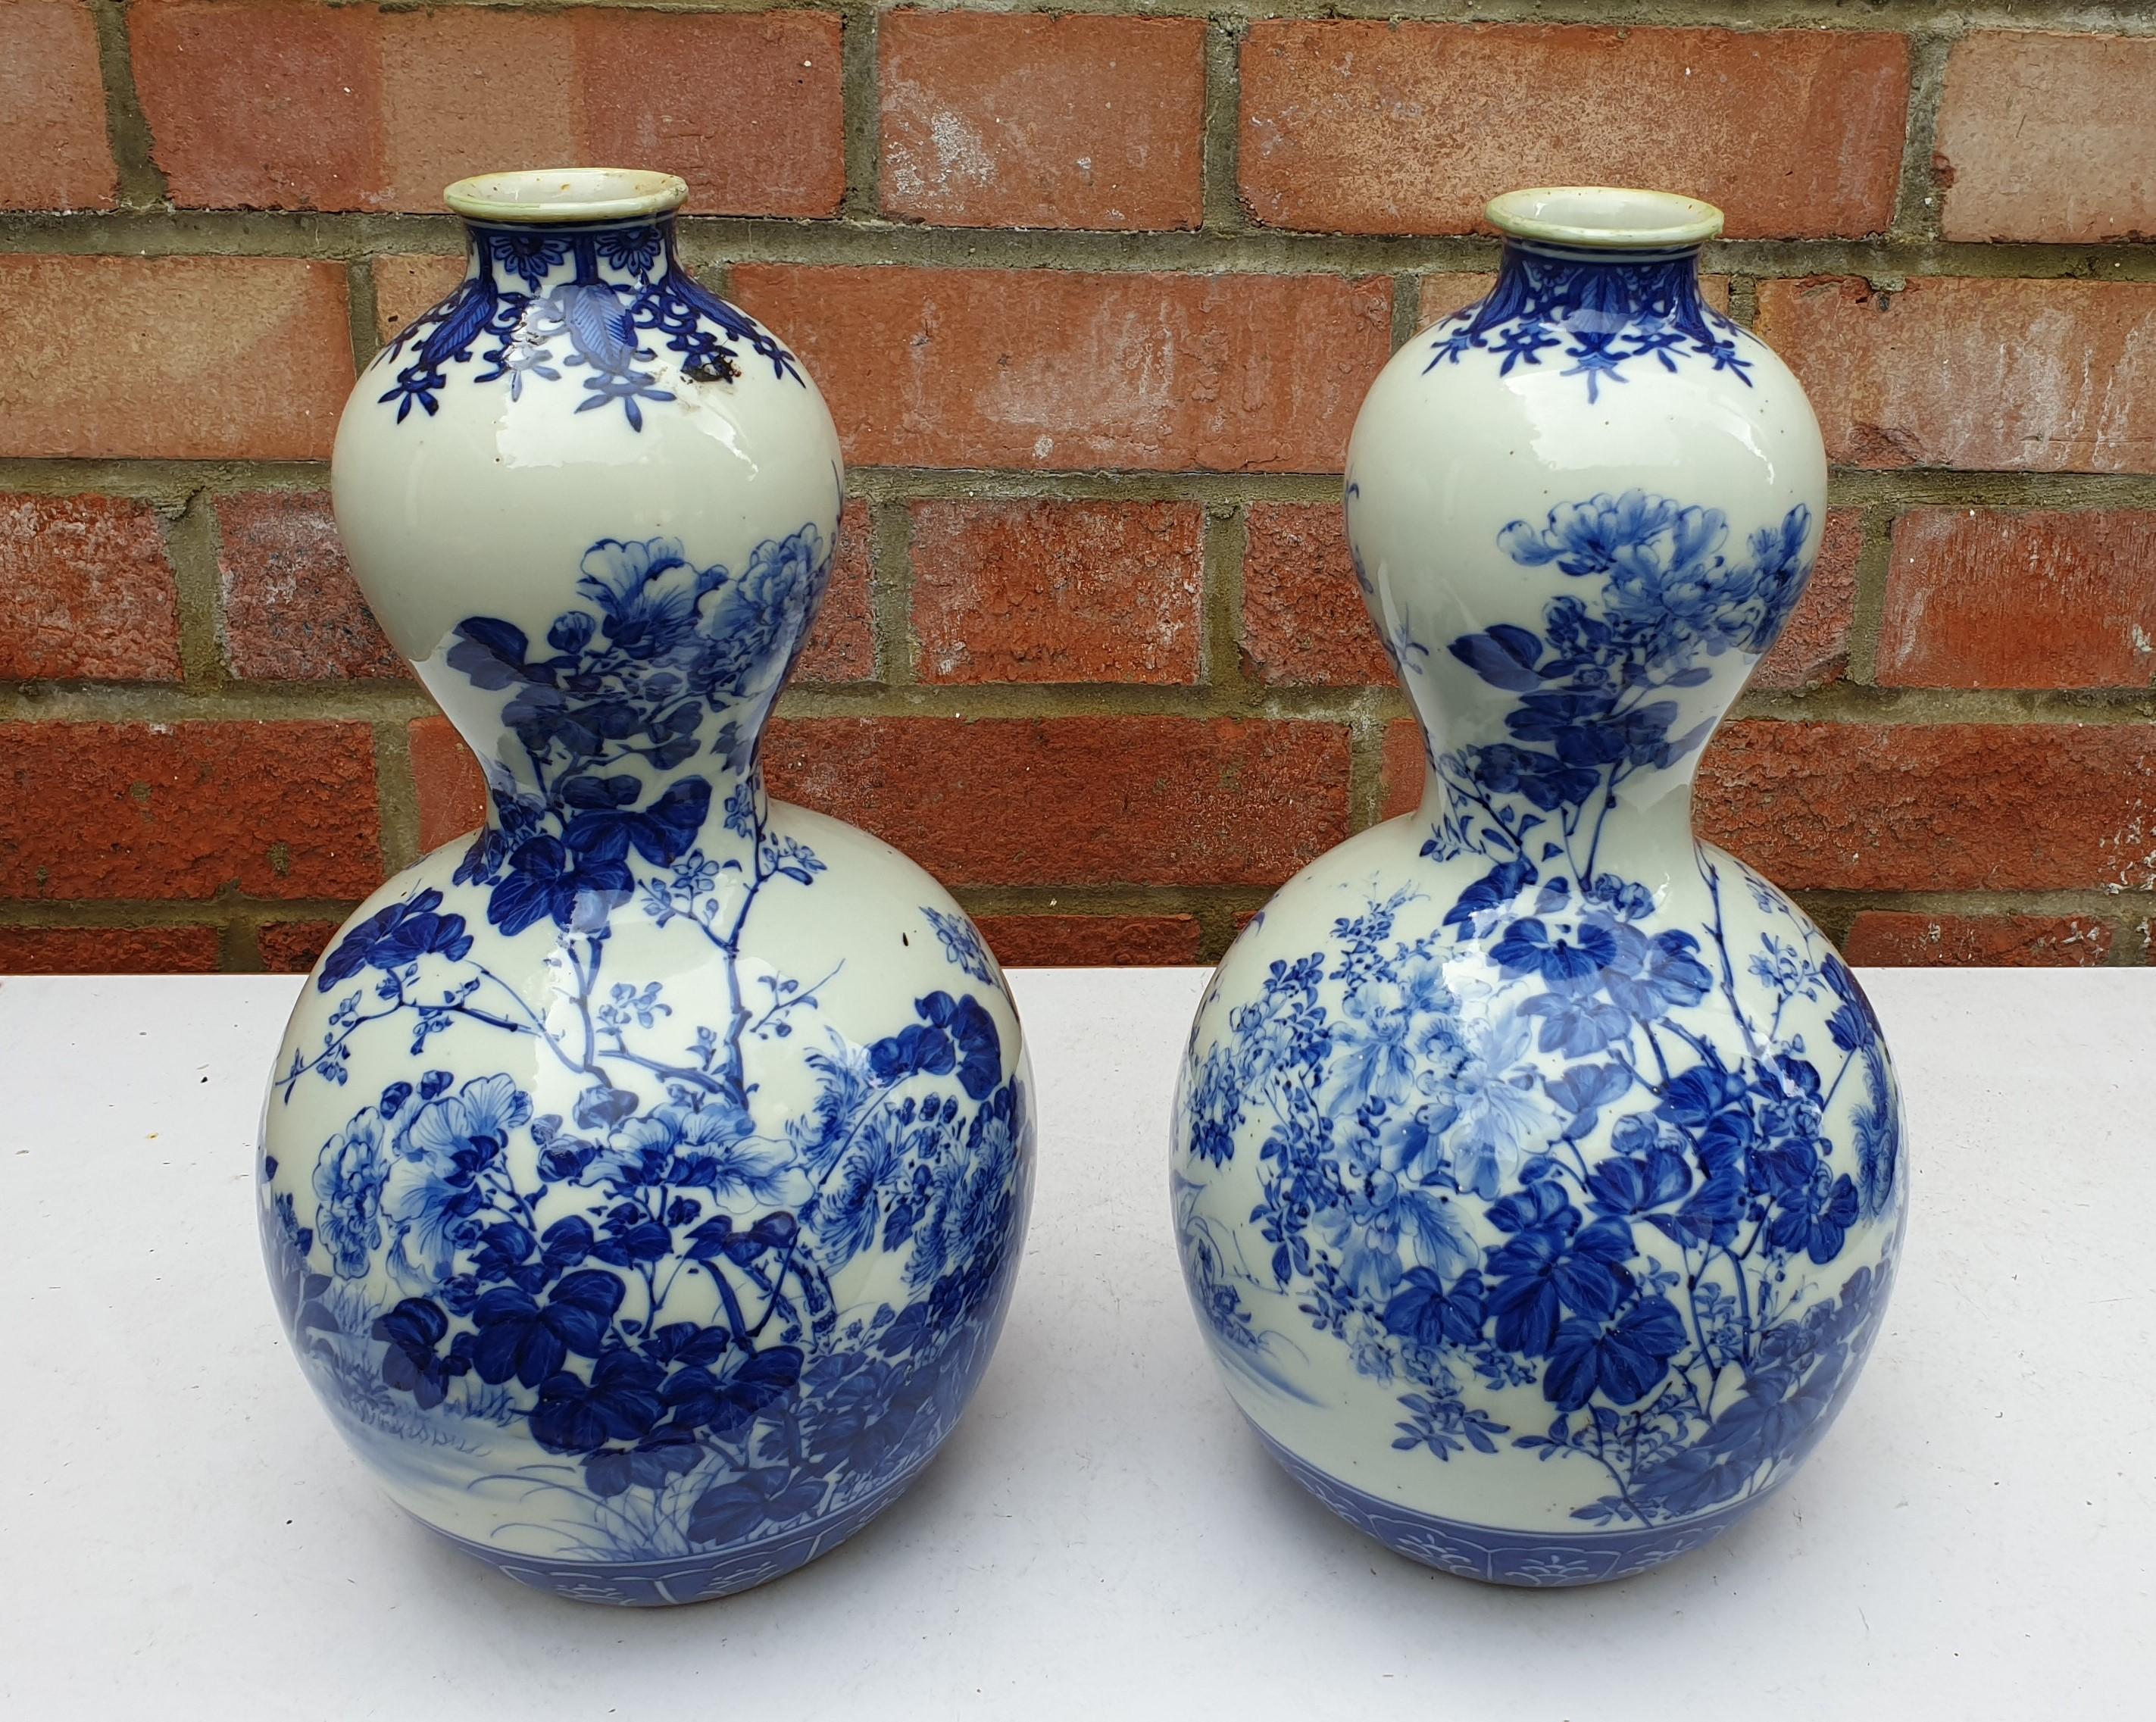 Pair of Japaneses hand painted blue and white double gourde vases. Produced in the Meiji Period, with floral scenery dressing the vases. The vases are bulbous in shape with a small slender waist. Throughout the vases scenery of trailing branches and